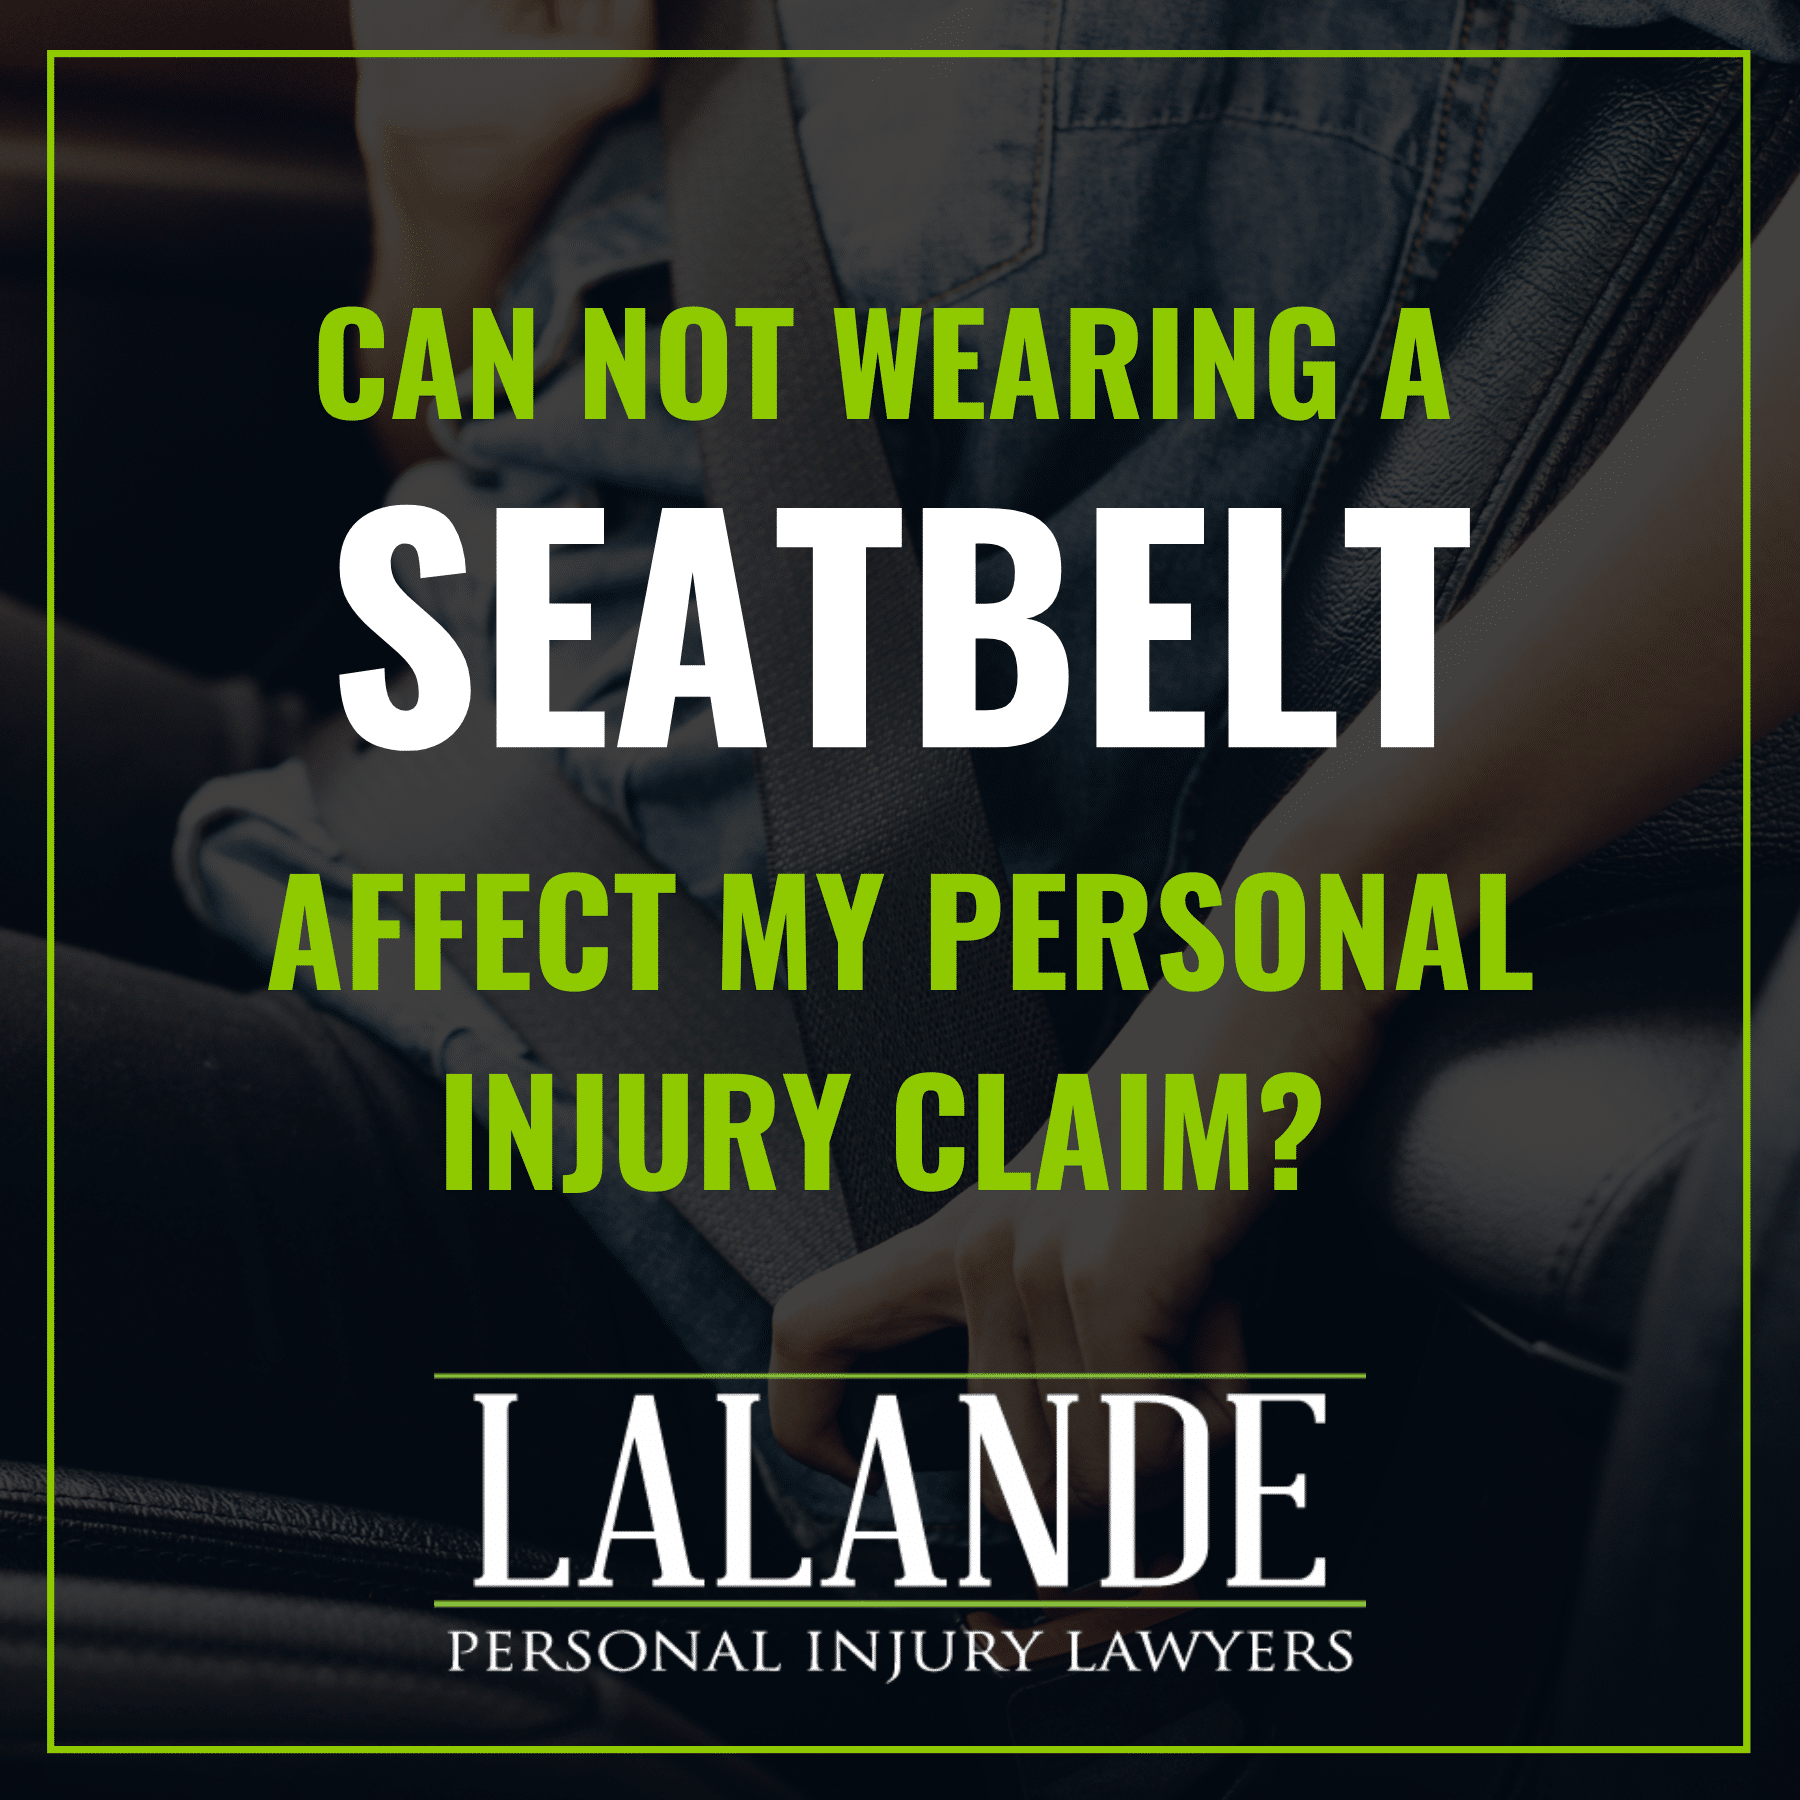 Can Not Wearing your Seat Belt Affect Your Personal Injury Claim?